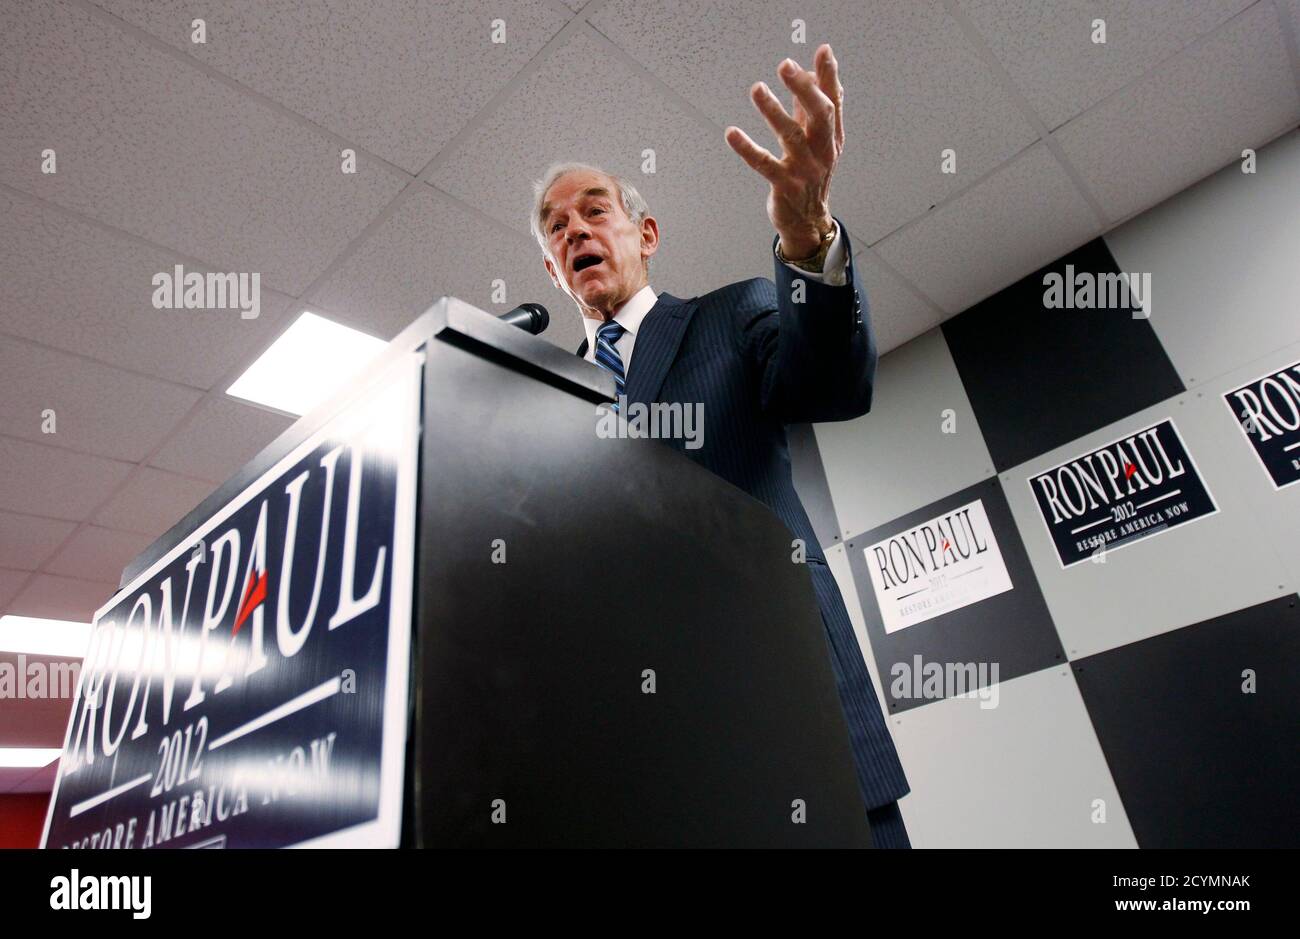 Republican presidential candidate Ron Paul speaks to supporters at a campaign stop at the Iowa Speedway in Newton, Iowa December 28, 2011. REUTERS/Jeff Haynes (UNITED STATES - Tags: POLITICS) Stock Photo